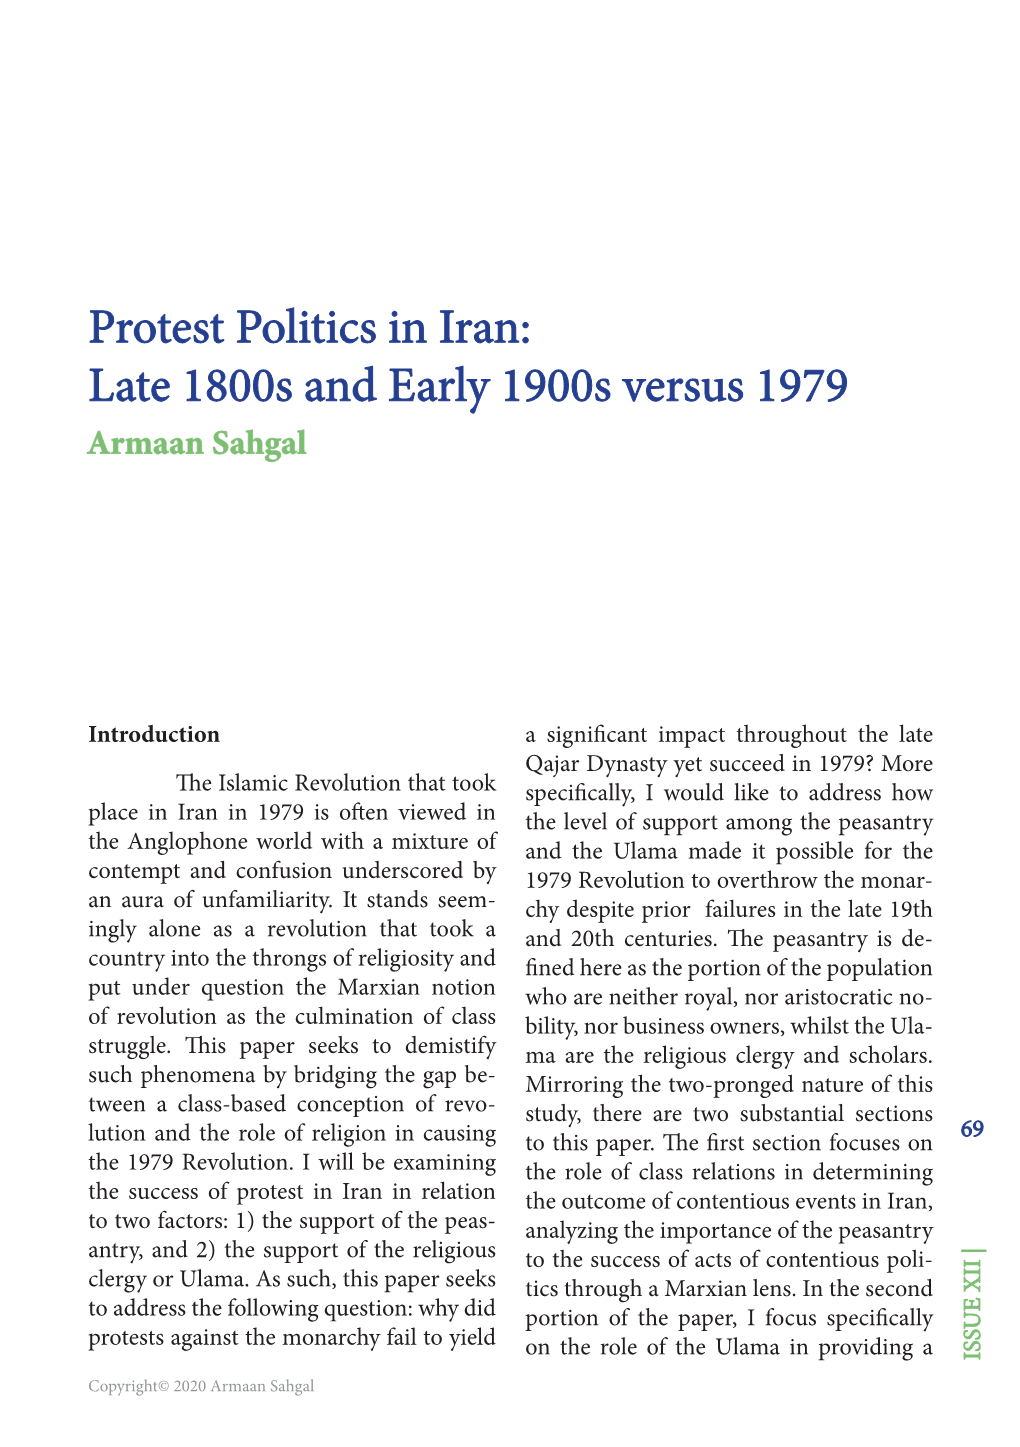 Protest Politics in Iran: Late 1800S and Early 1900S Versus 1979